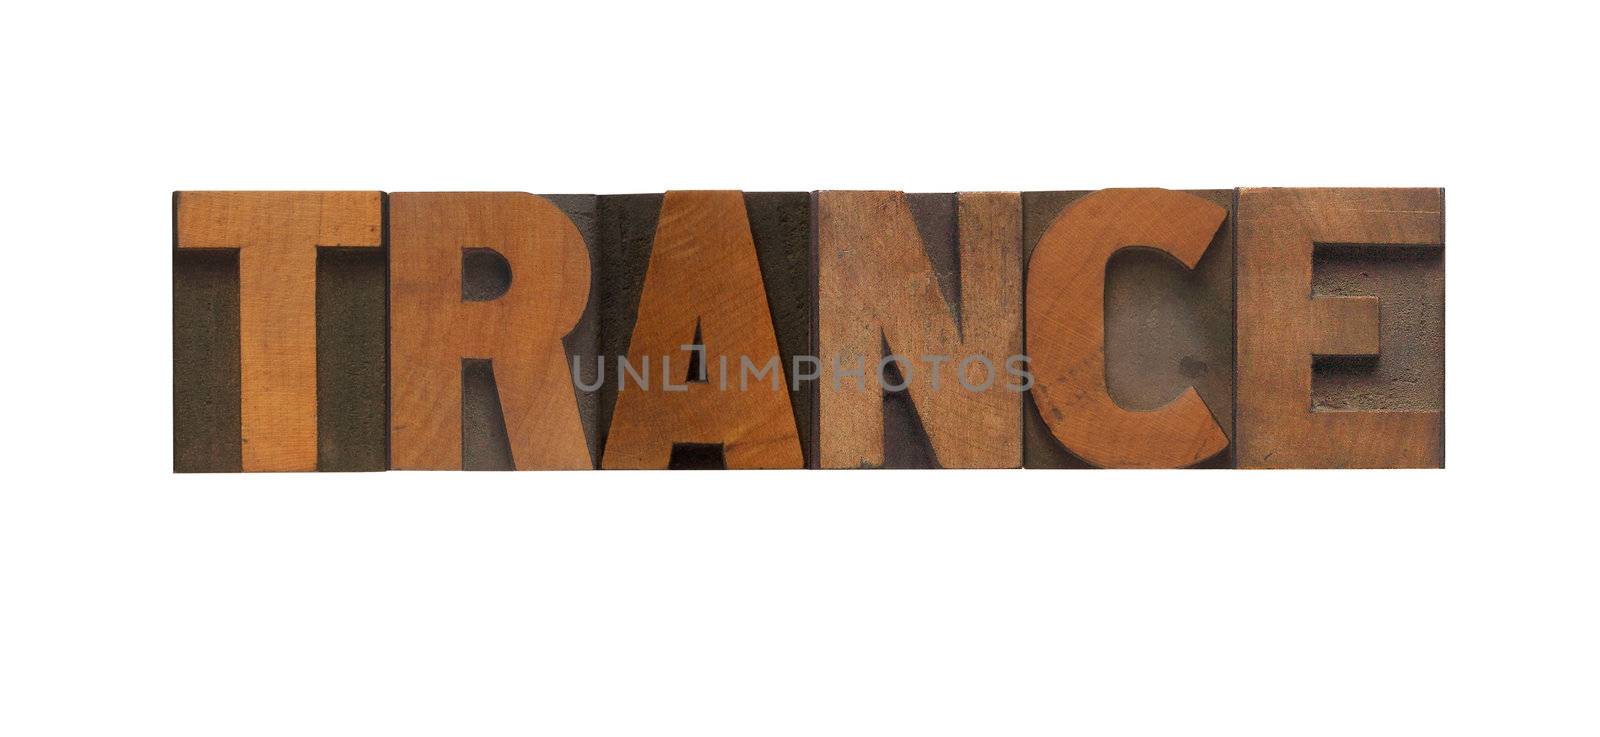 the word trance in old letterpress wood type